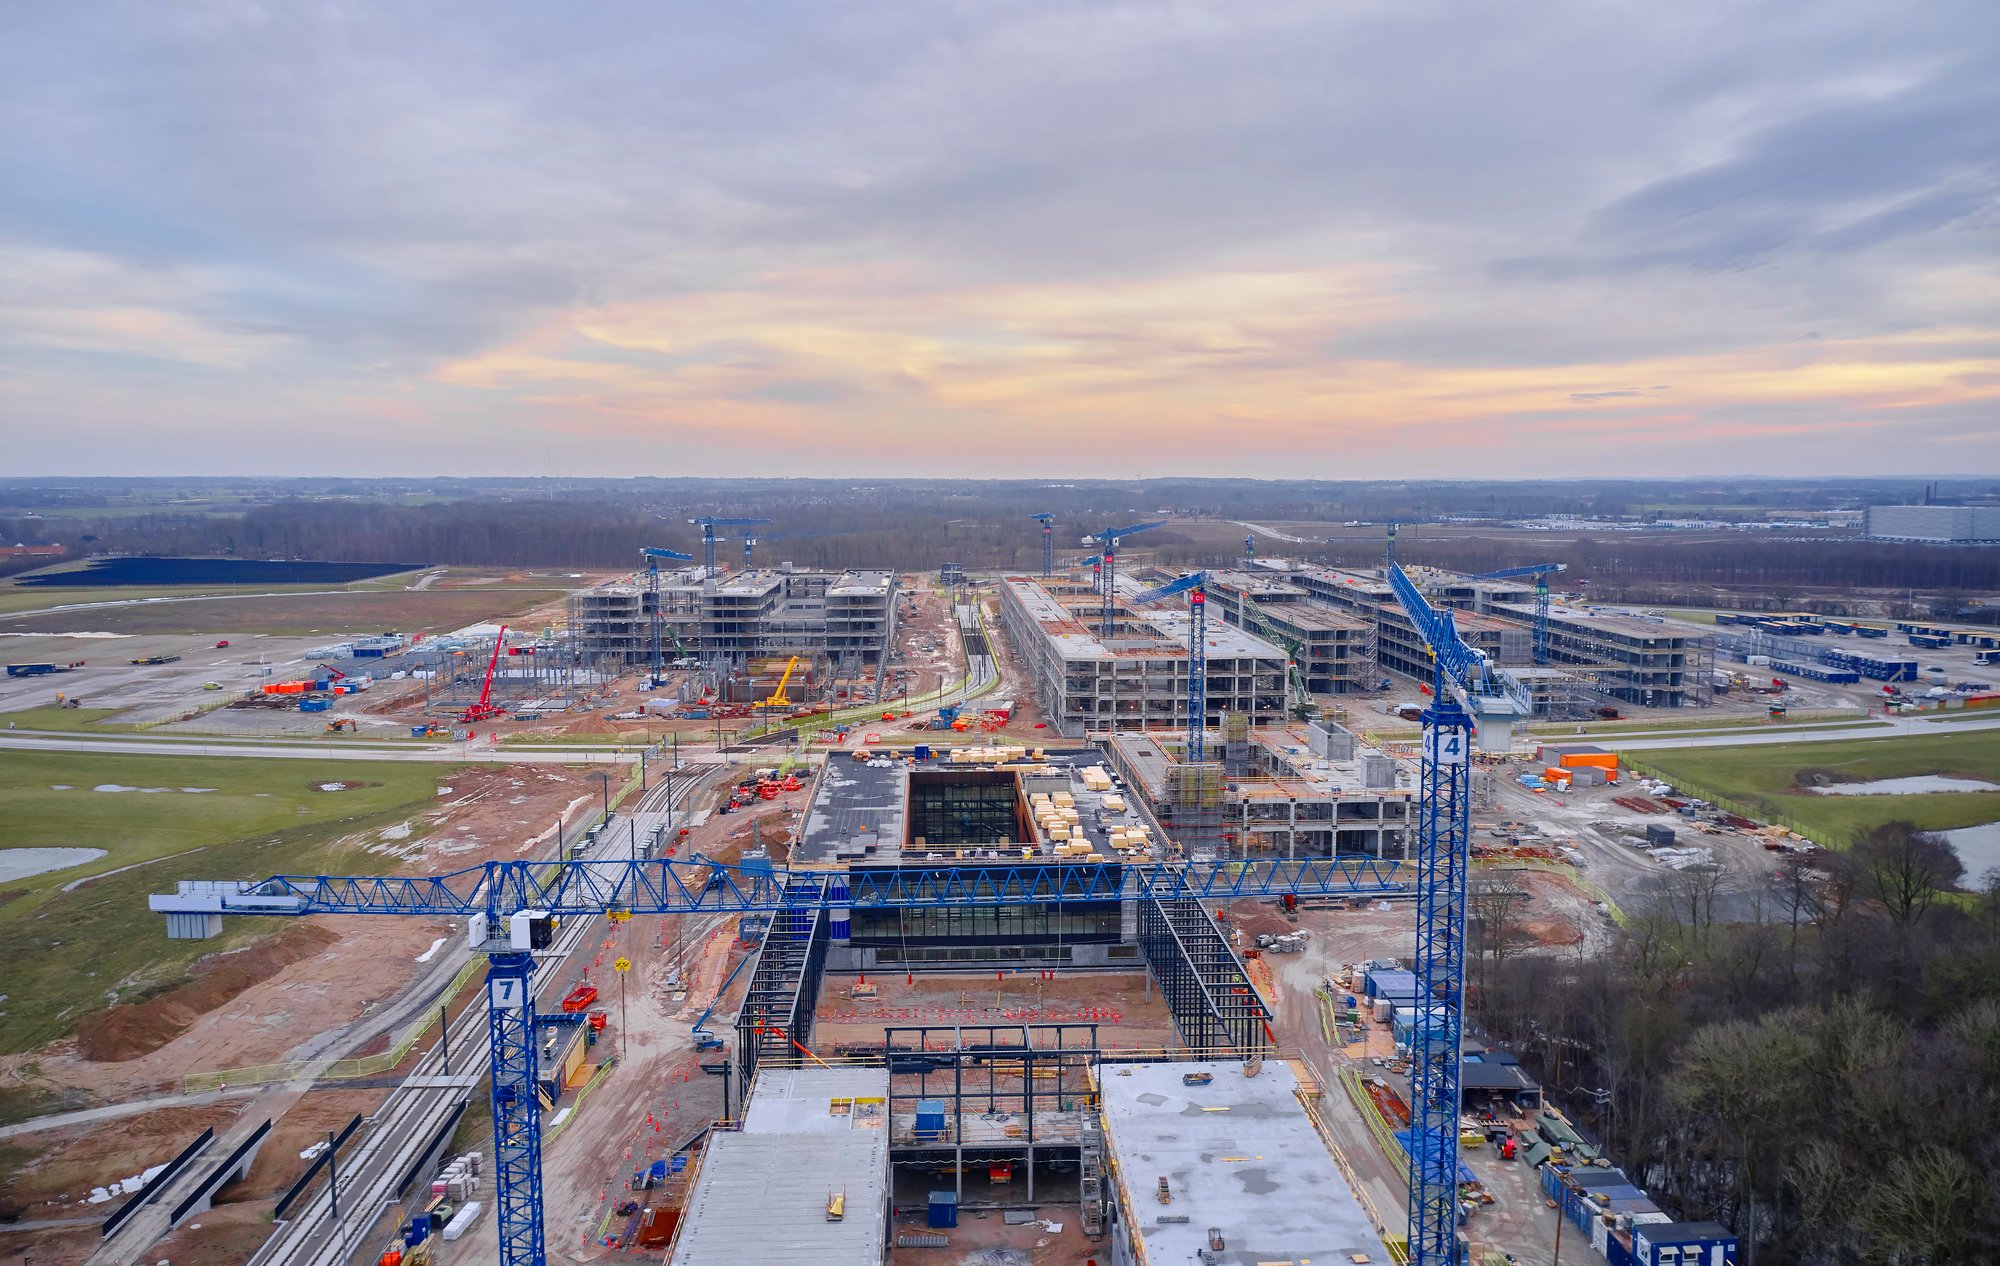 Image of a large construction job site to symbolize GearTrack's asset arrival and departure alerts functionality.